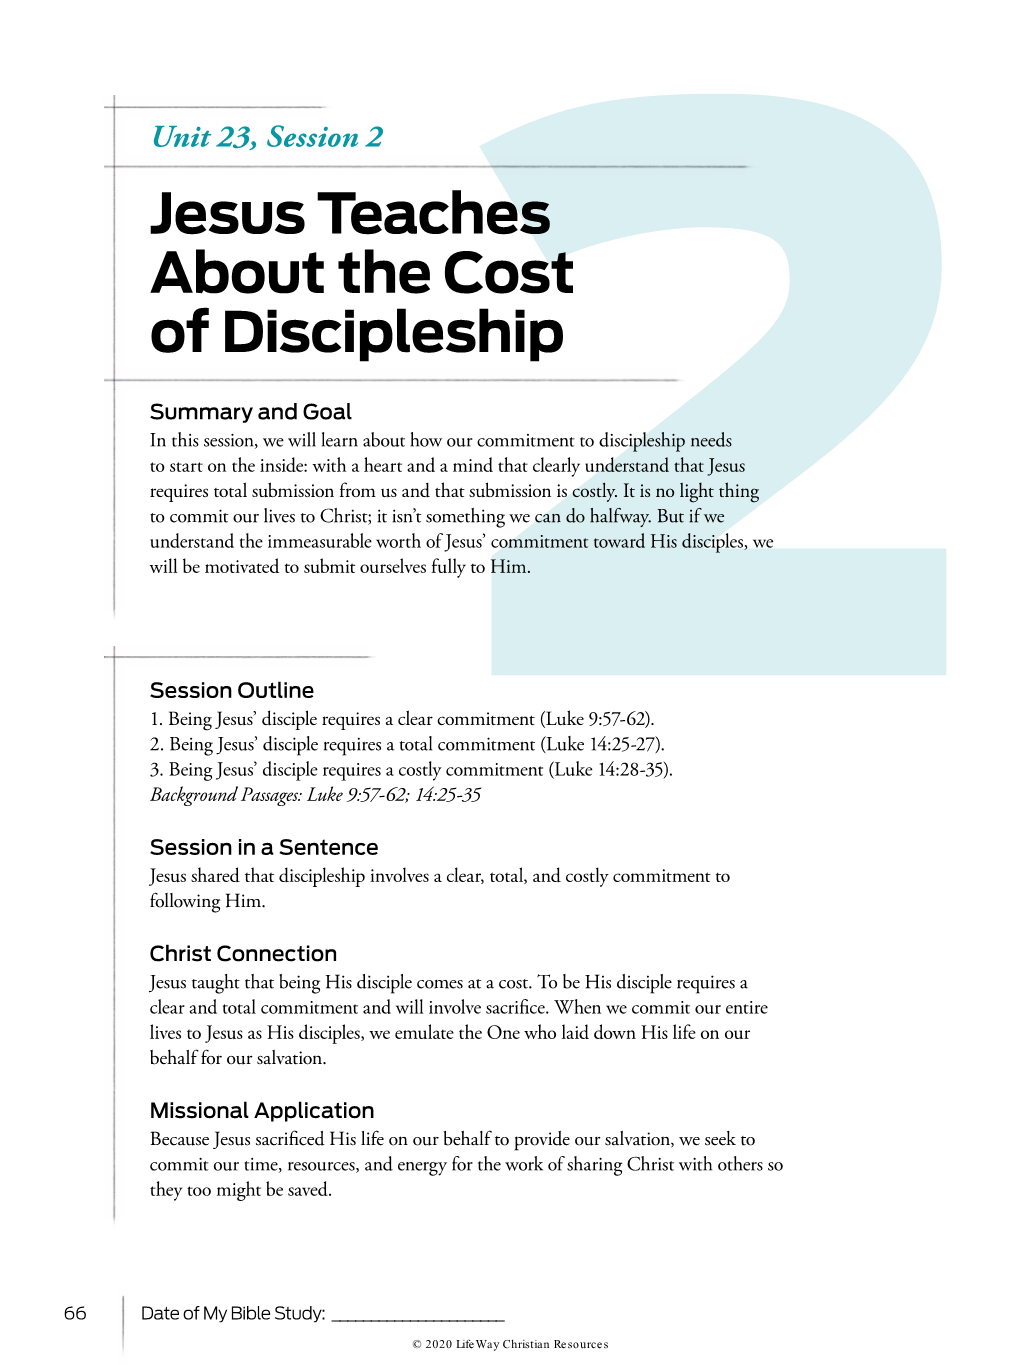 Unit 23, Session 2 Jesus Teaches About the Cost of Discipleship